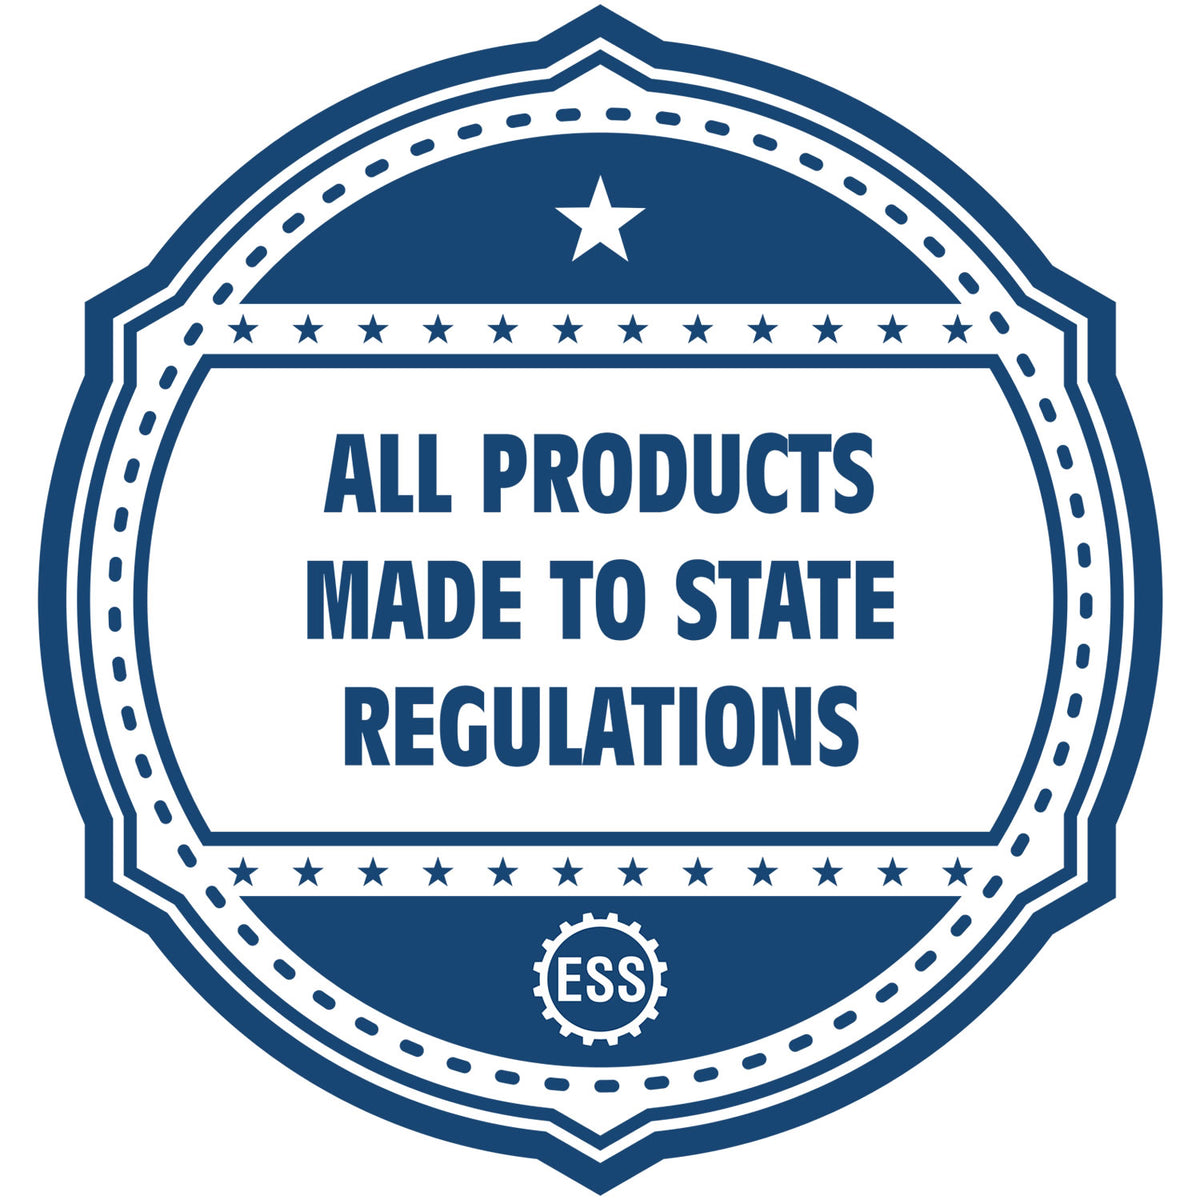 An icon or badge element for the Pennsylvania Landscape Architectural Seal Stamp showing that this product is made in compliance with state regulations.